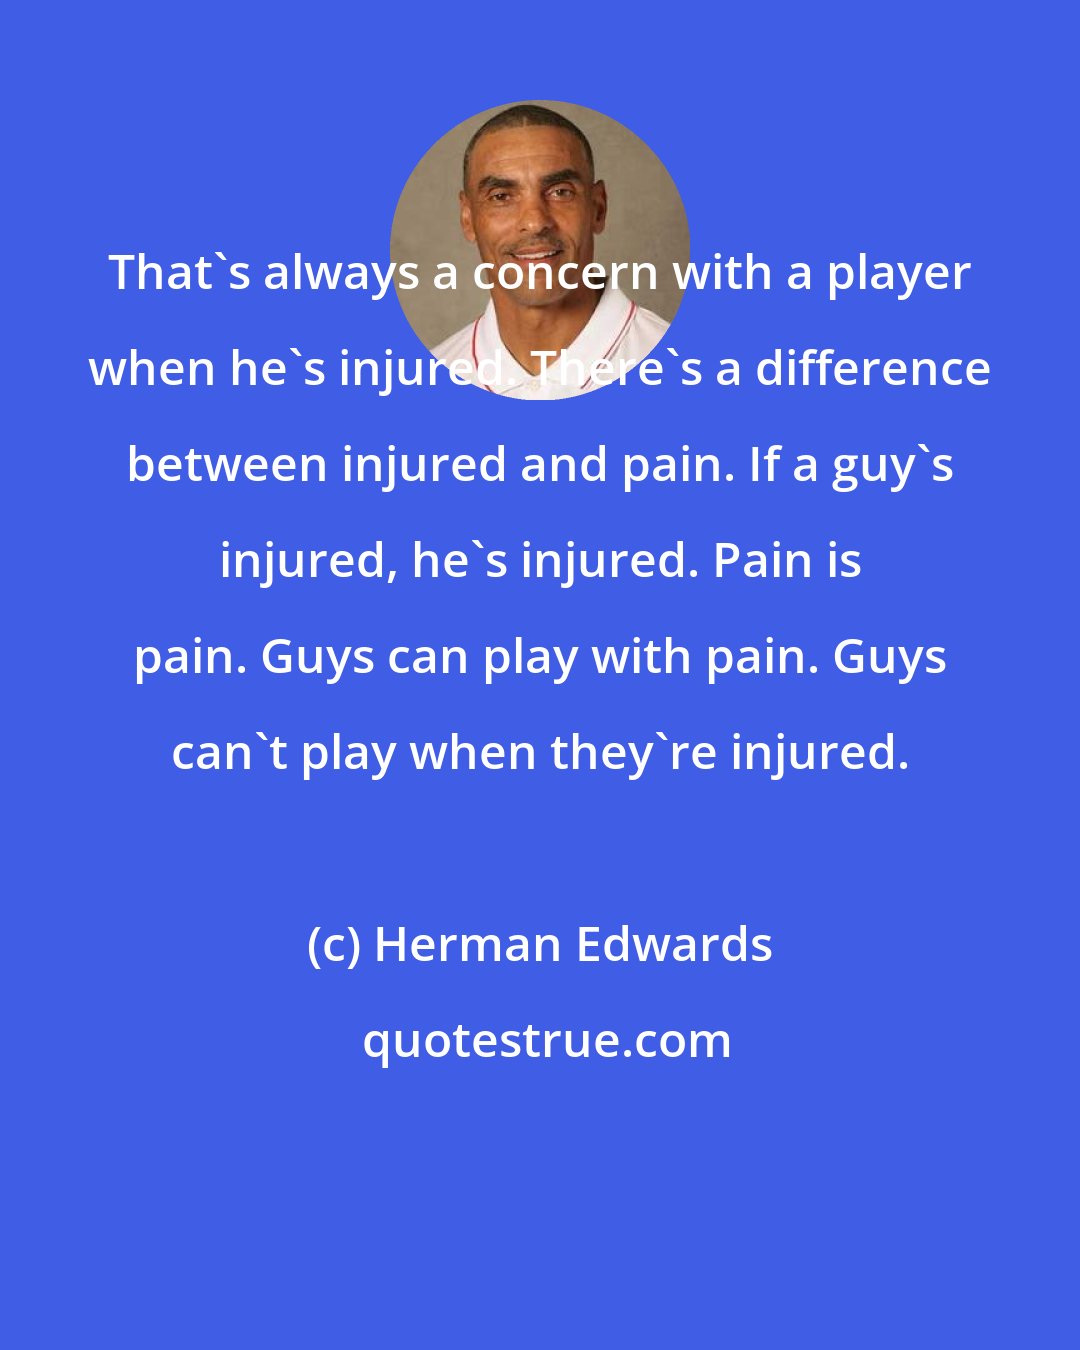 Herman Edwards: That's always a concern with a player when he's injured. There's a difference between injured and pain. If a guy's injured, he's injured. Pain is pain. Guys can play with pain. Guys can't play when they're injured.